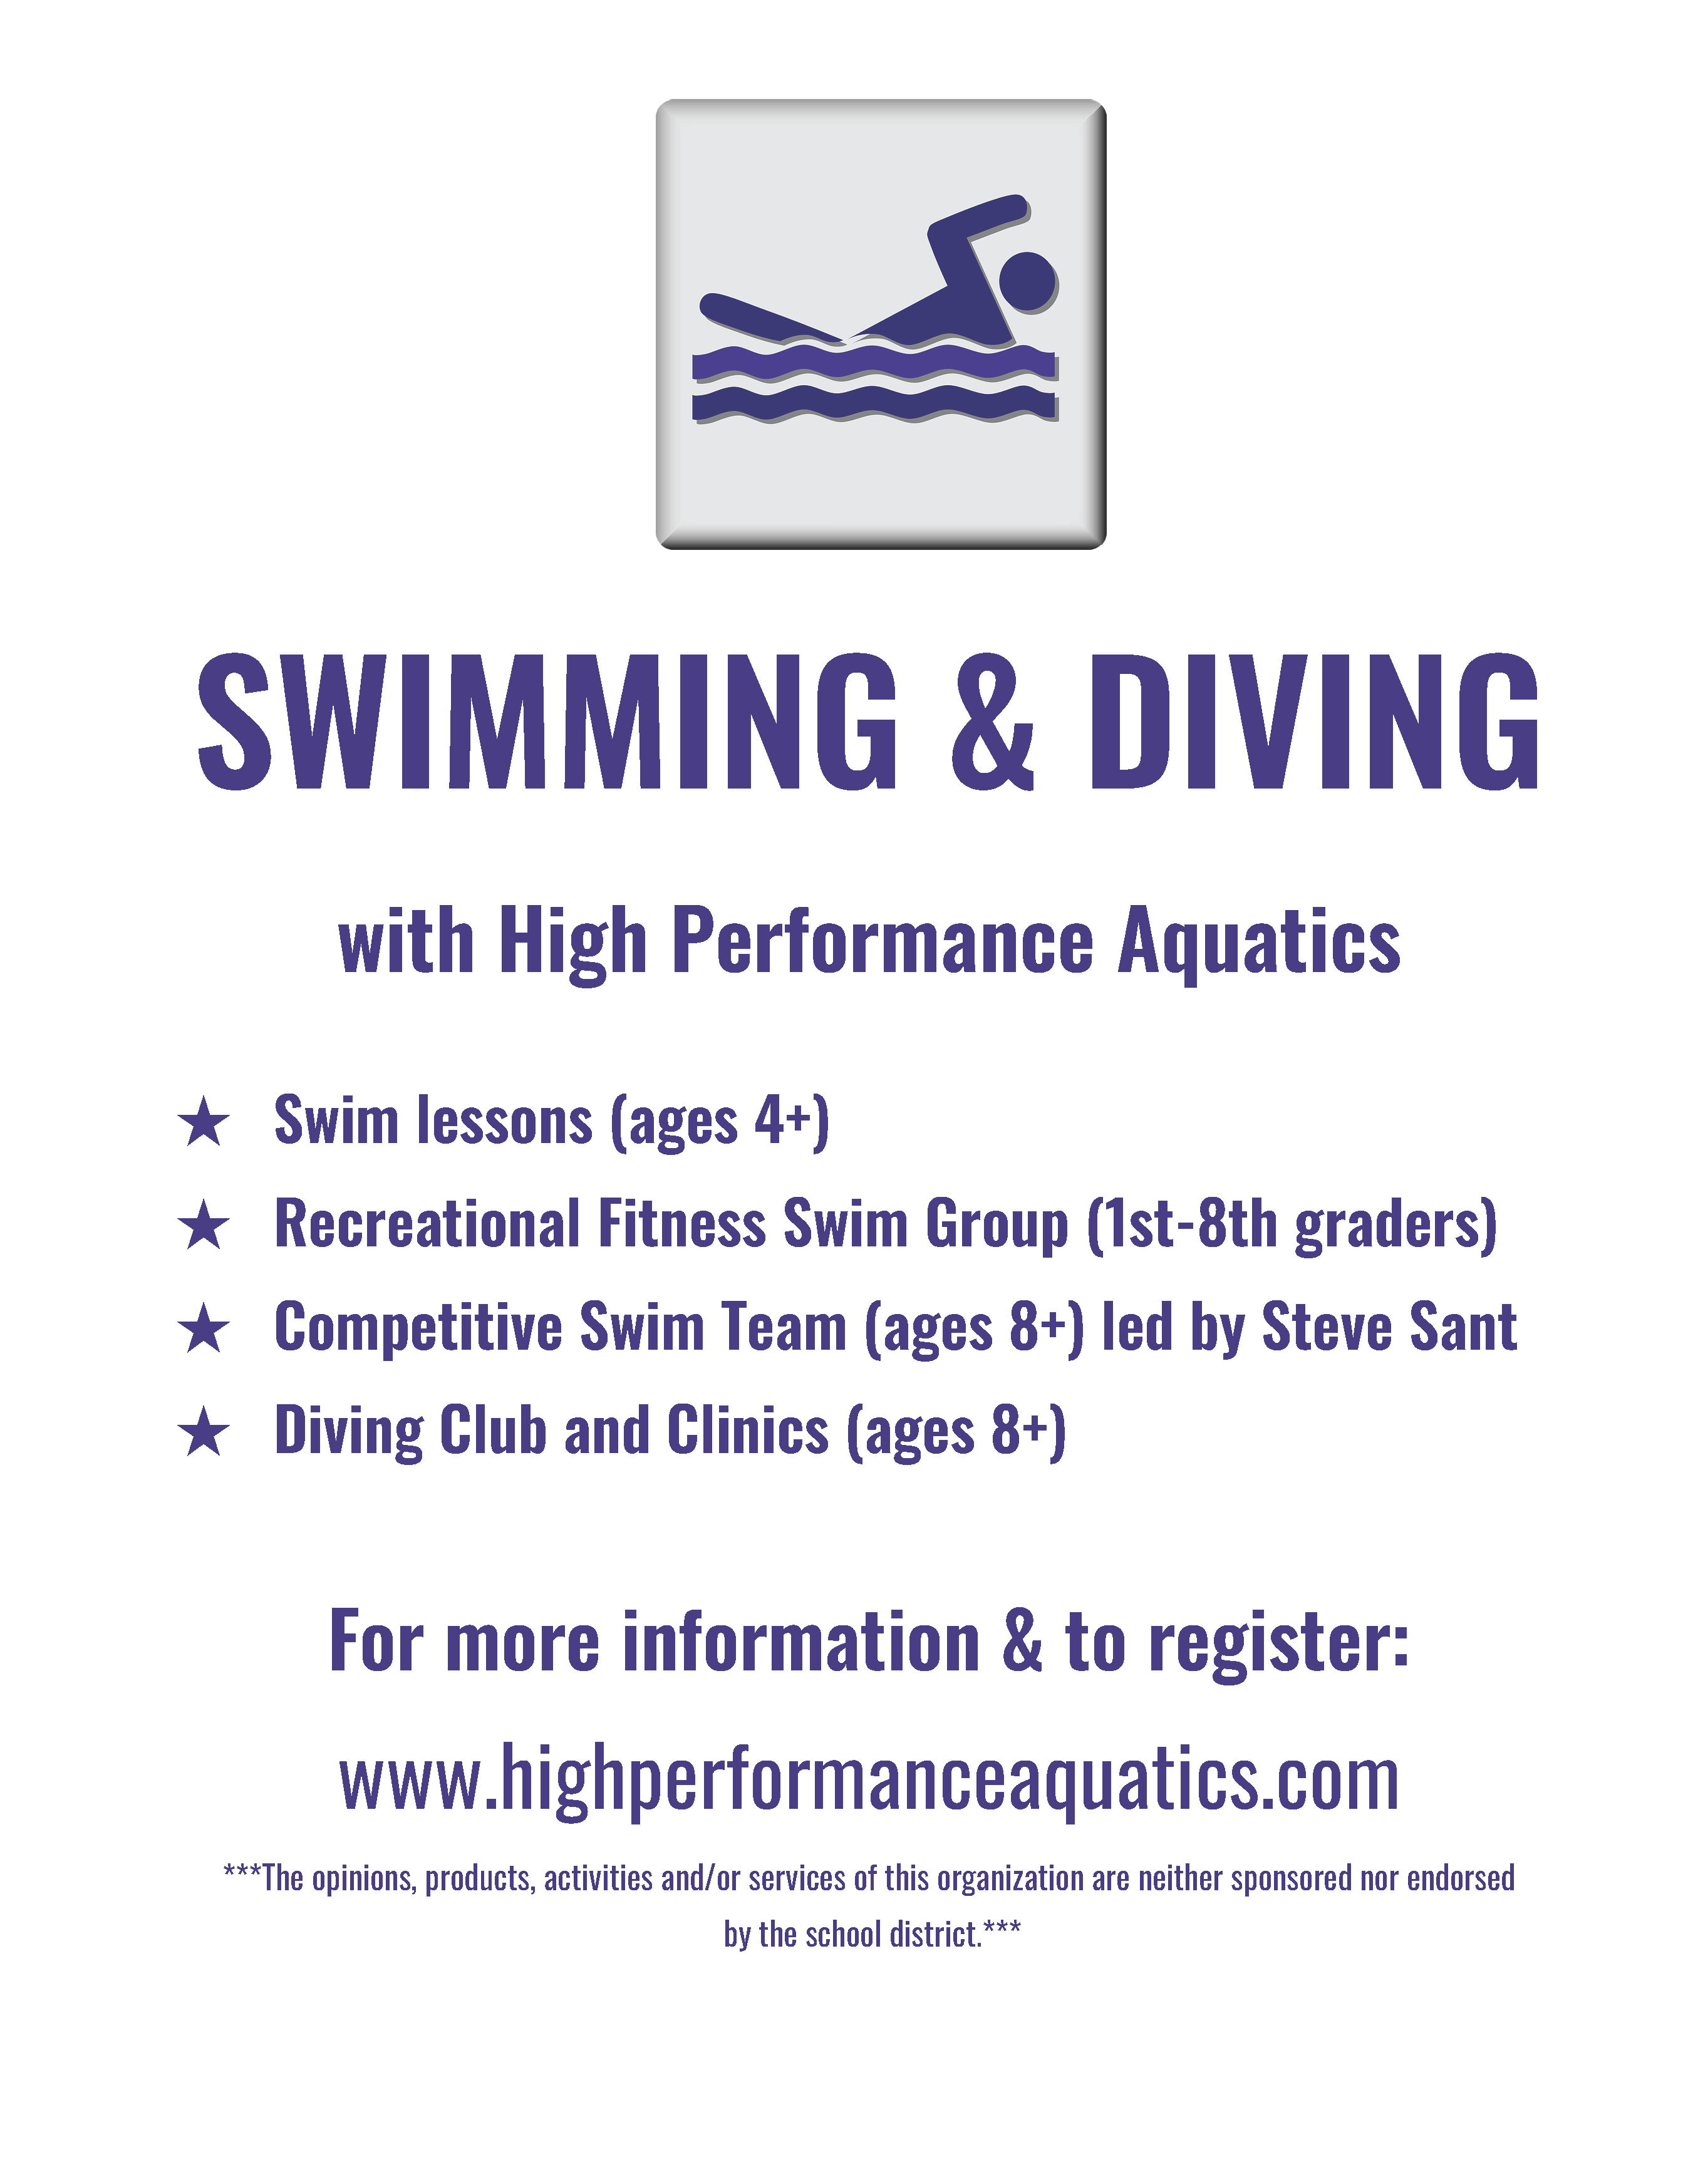 High Performance Swimming and Diving flyer link